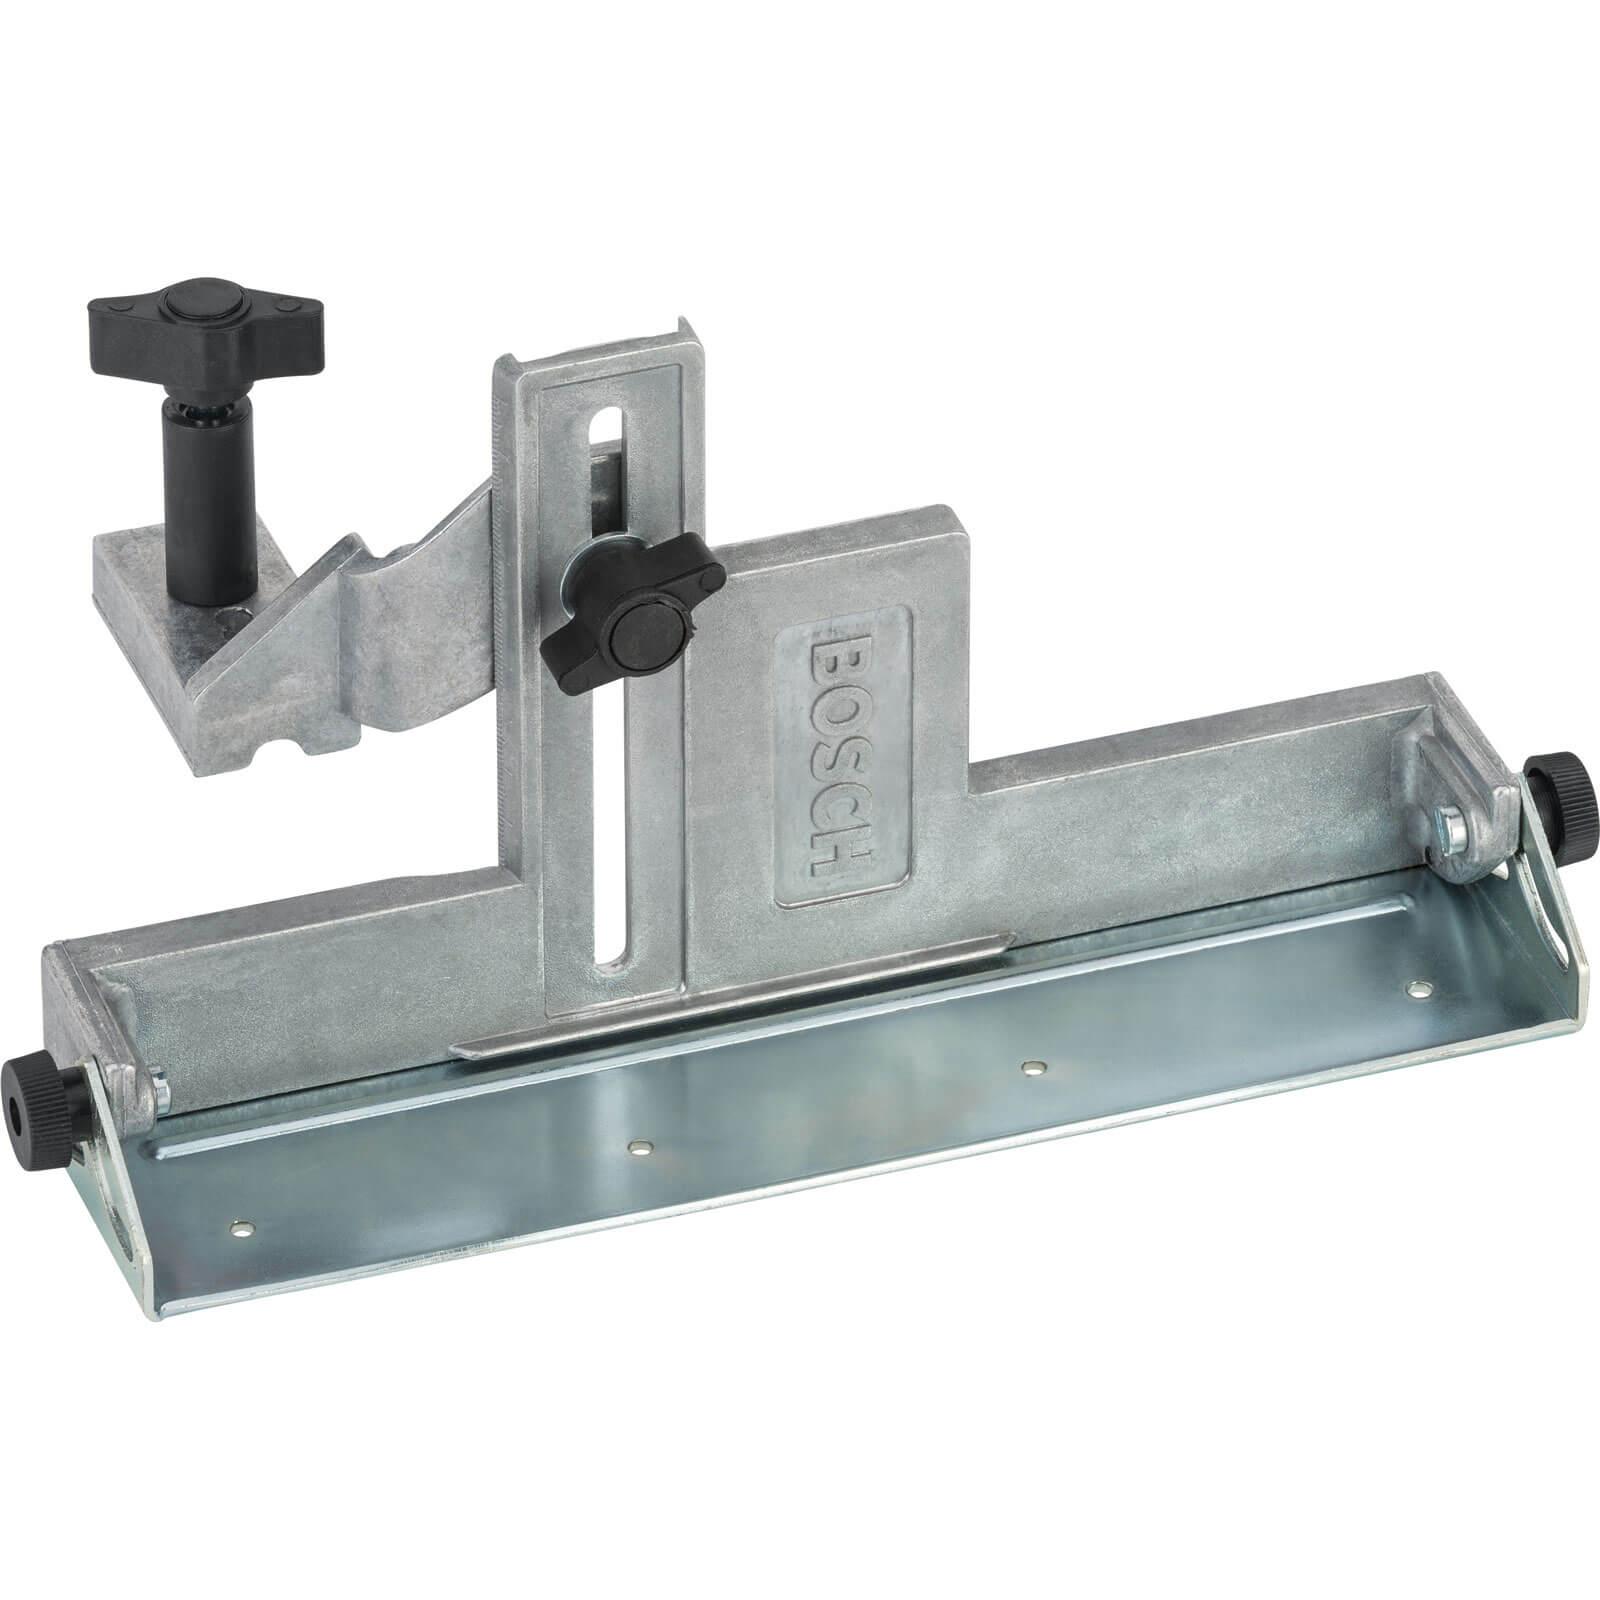 Photo of Bosch Parallel And Angle Guide For Pho And Gho Planers